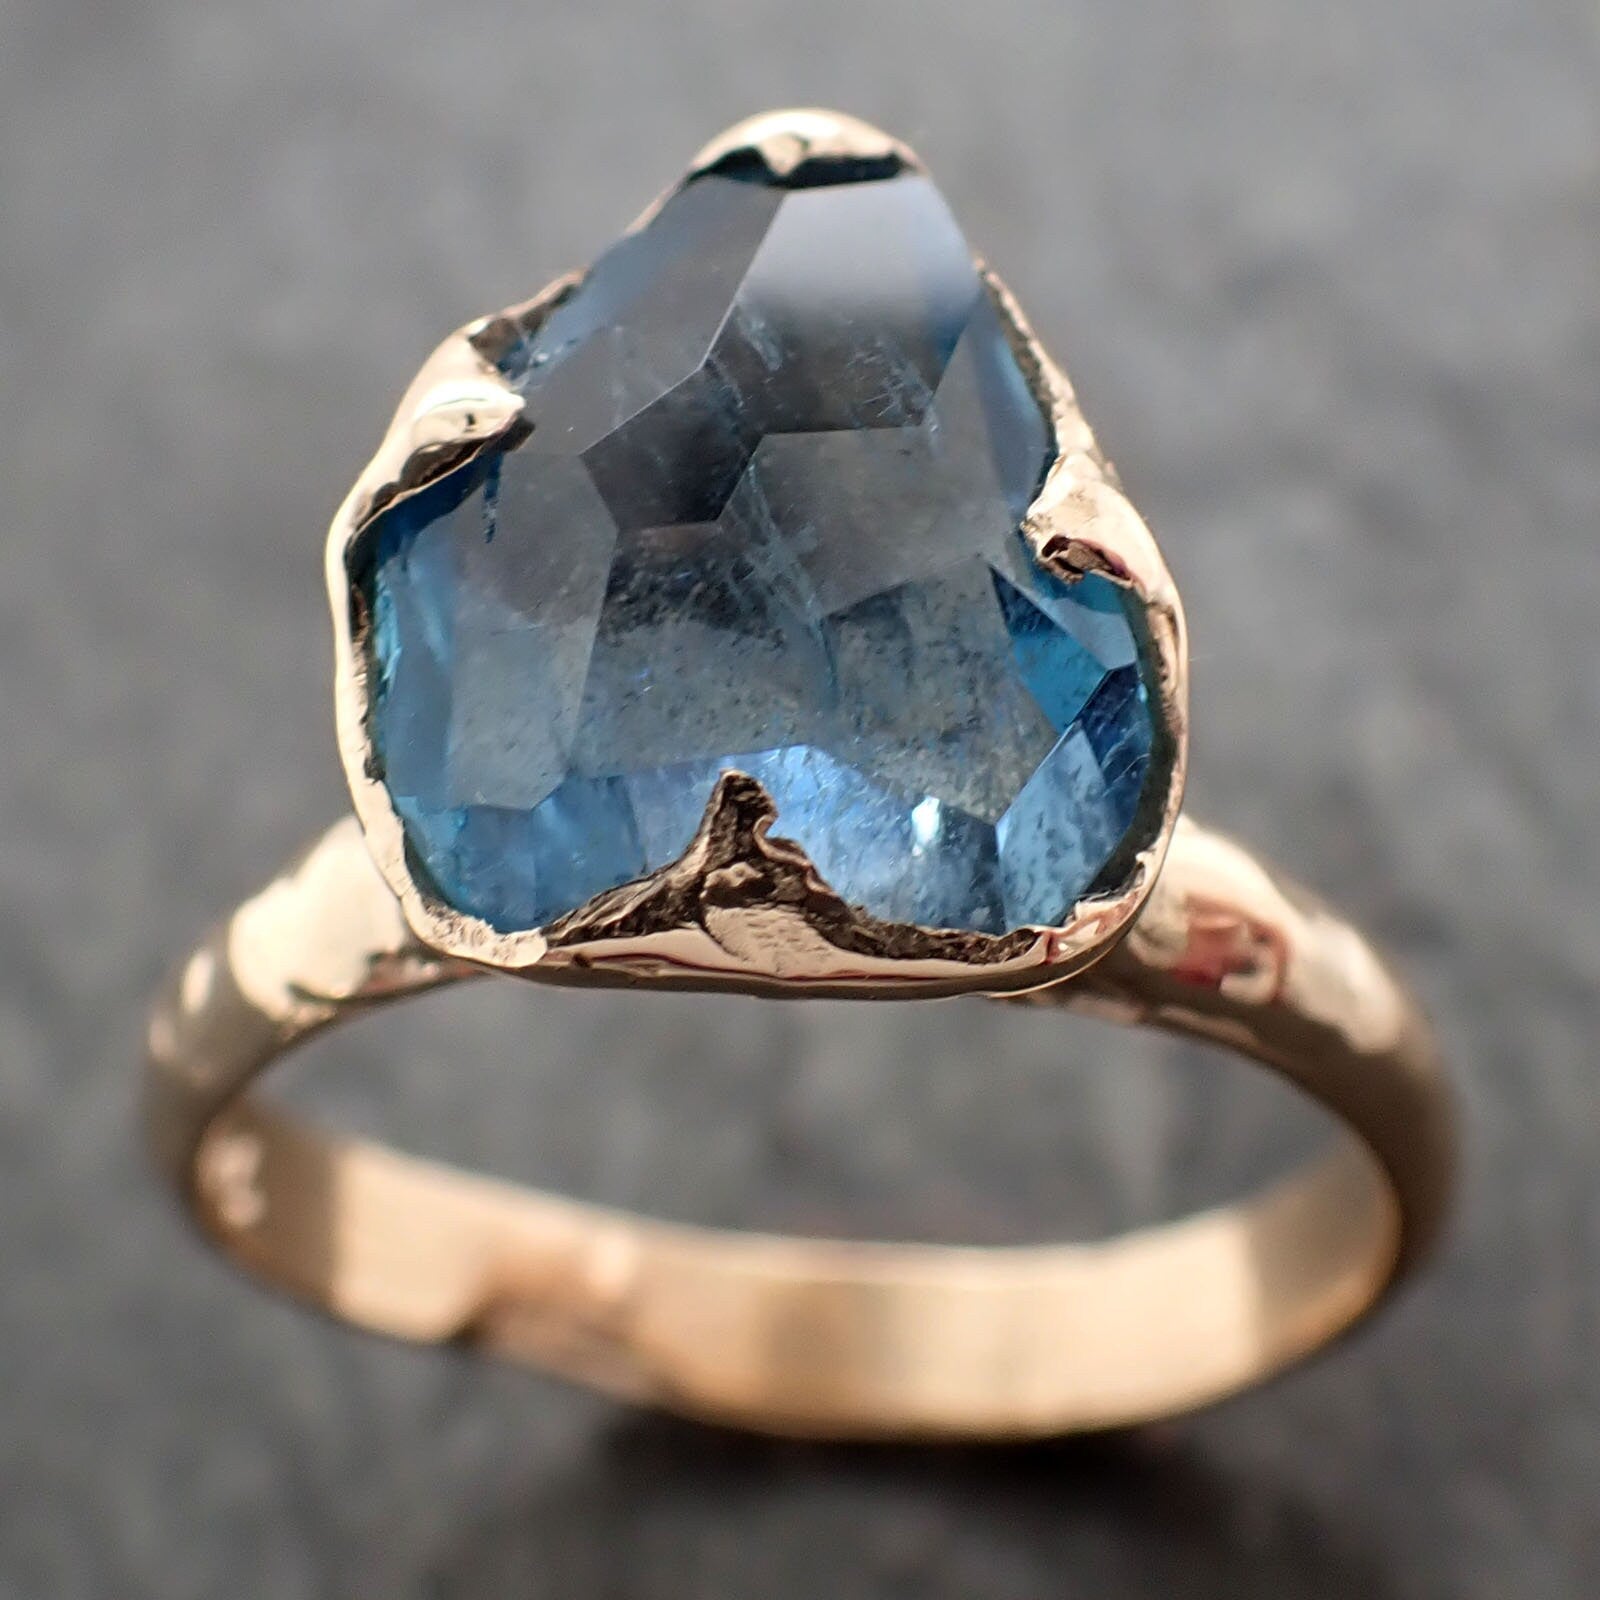 Partially faceted Aquamarine Solitaire Ring 14k gold Custom One Of a Kind Gemstone Ring Bespoke byAngeline 2940